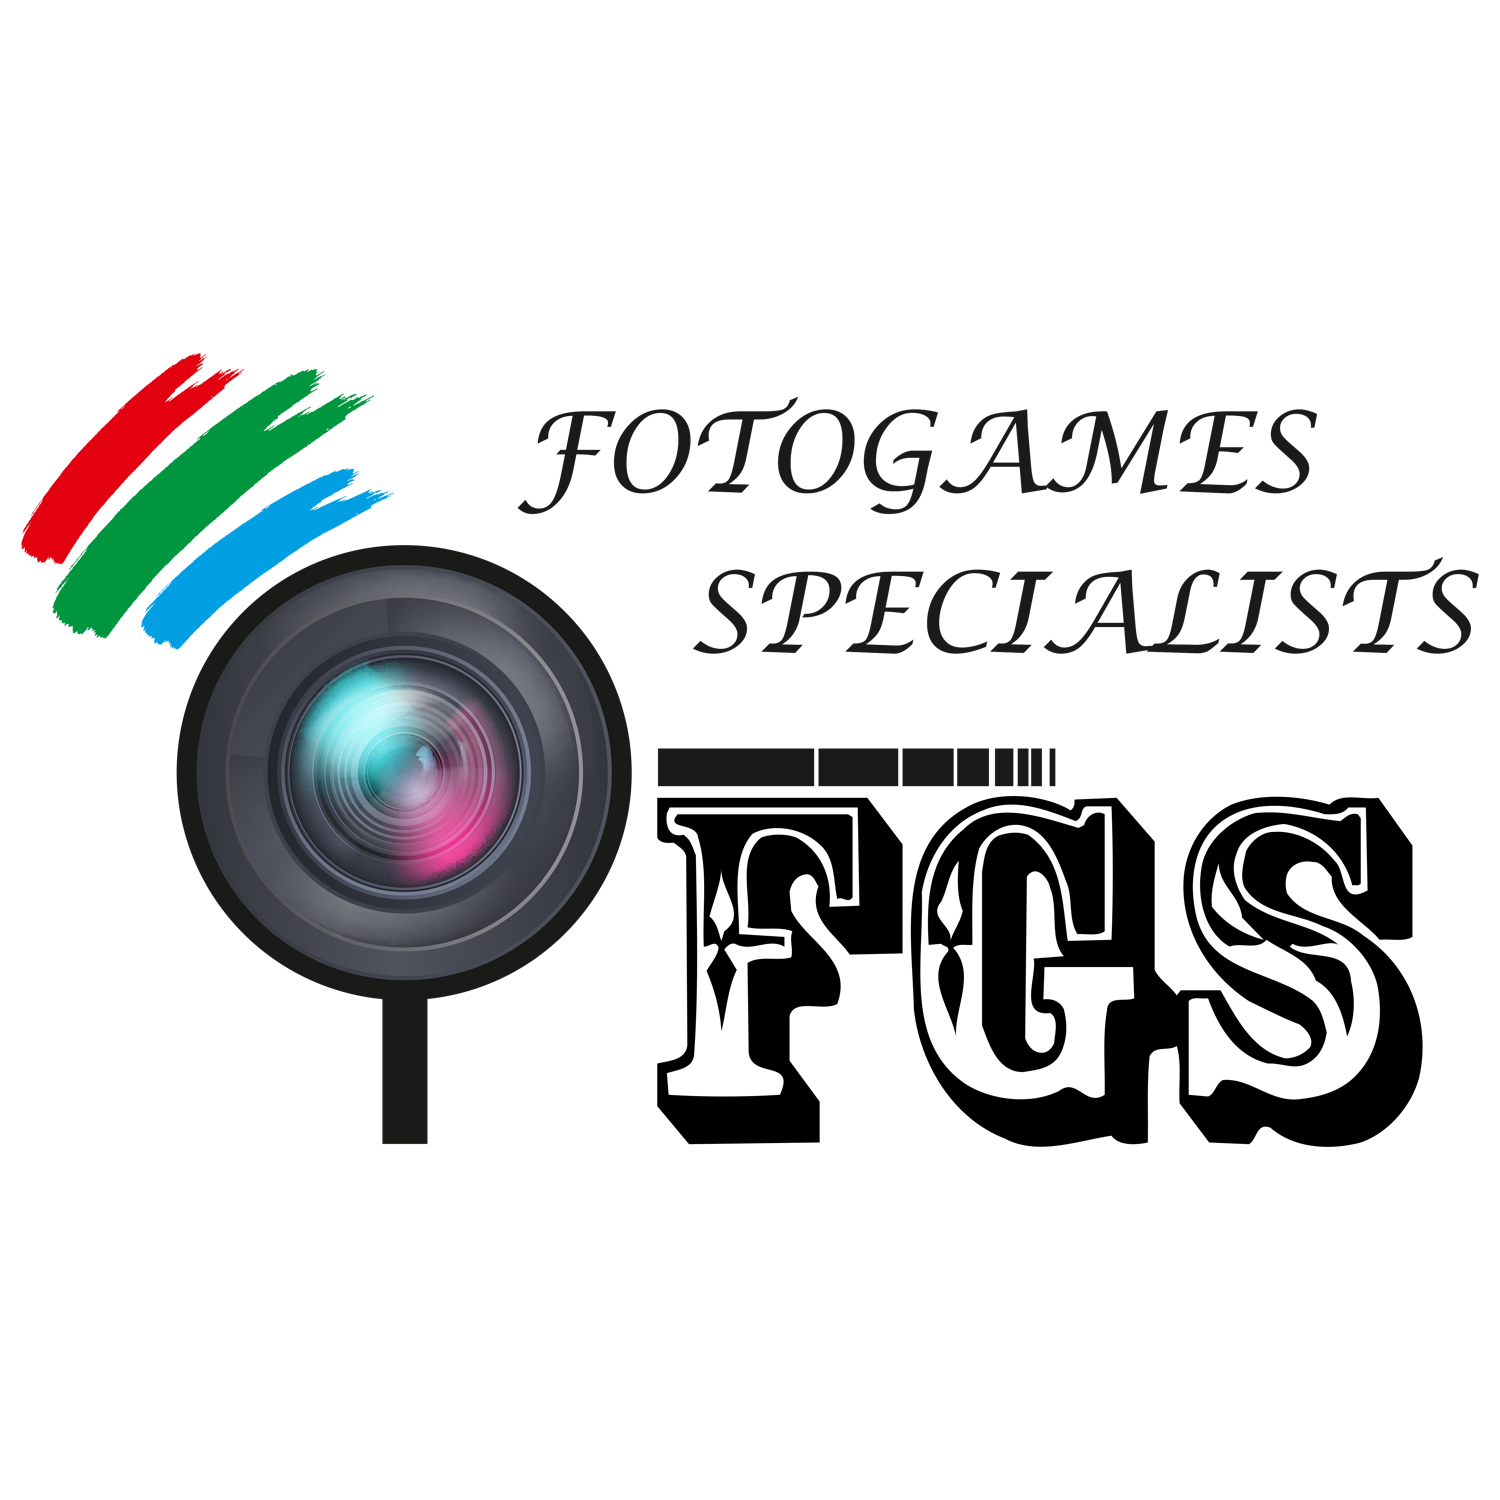 fotogames specialists